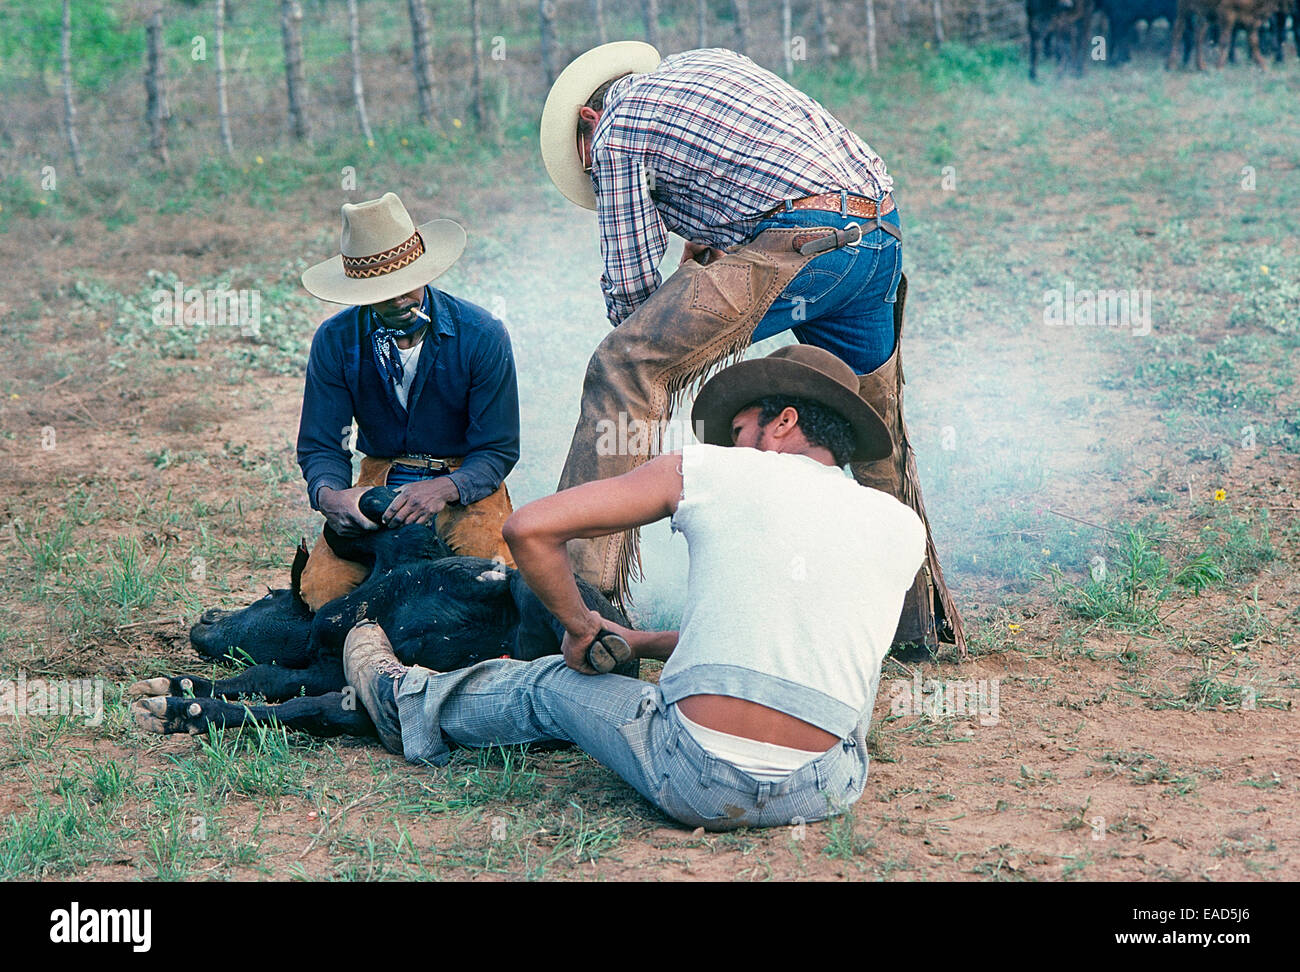 Cowboys on a Texas ranch brand and castrate a calf during the spring roundup and branding. Stock Photo